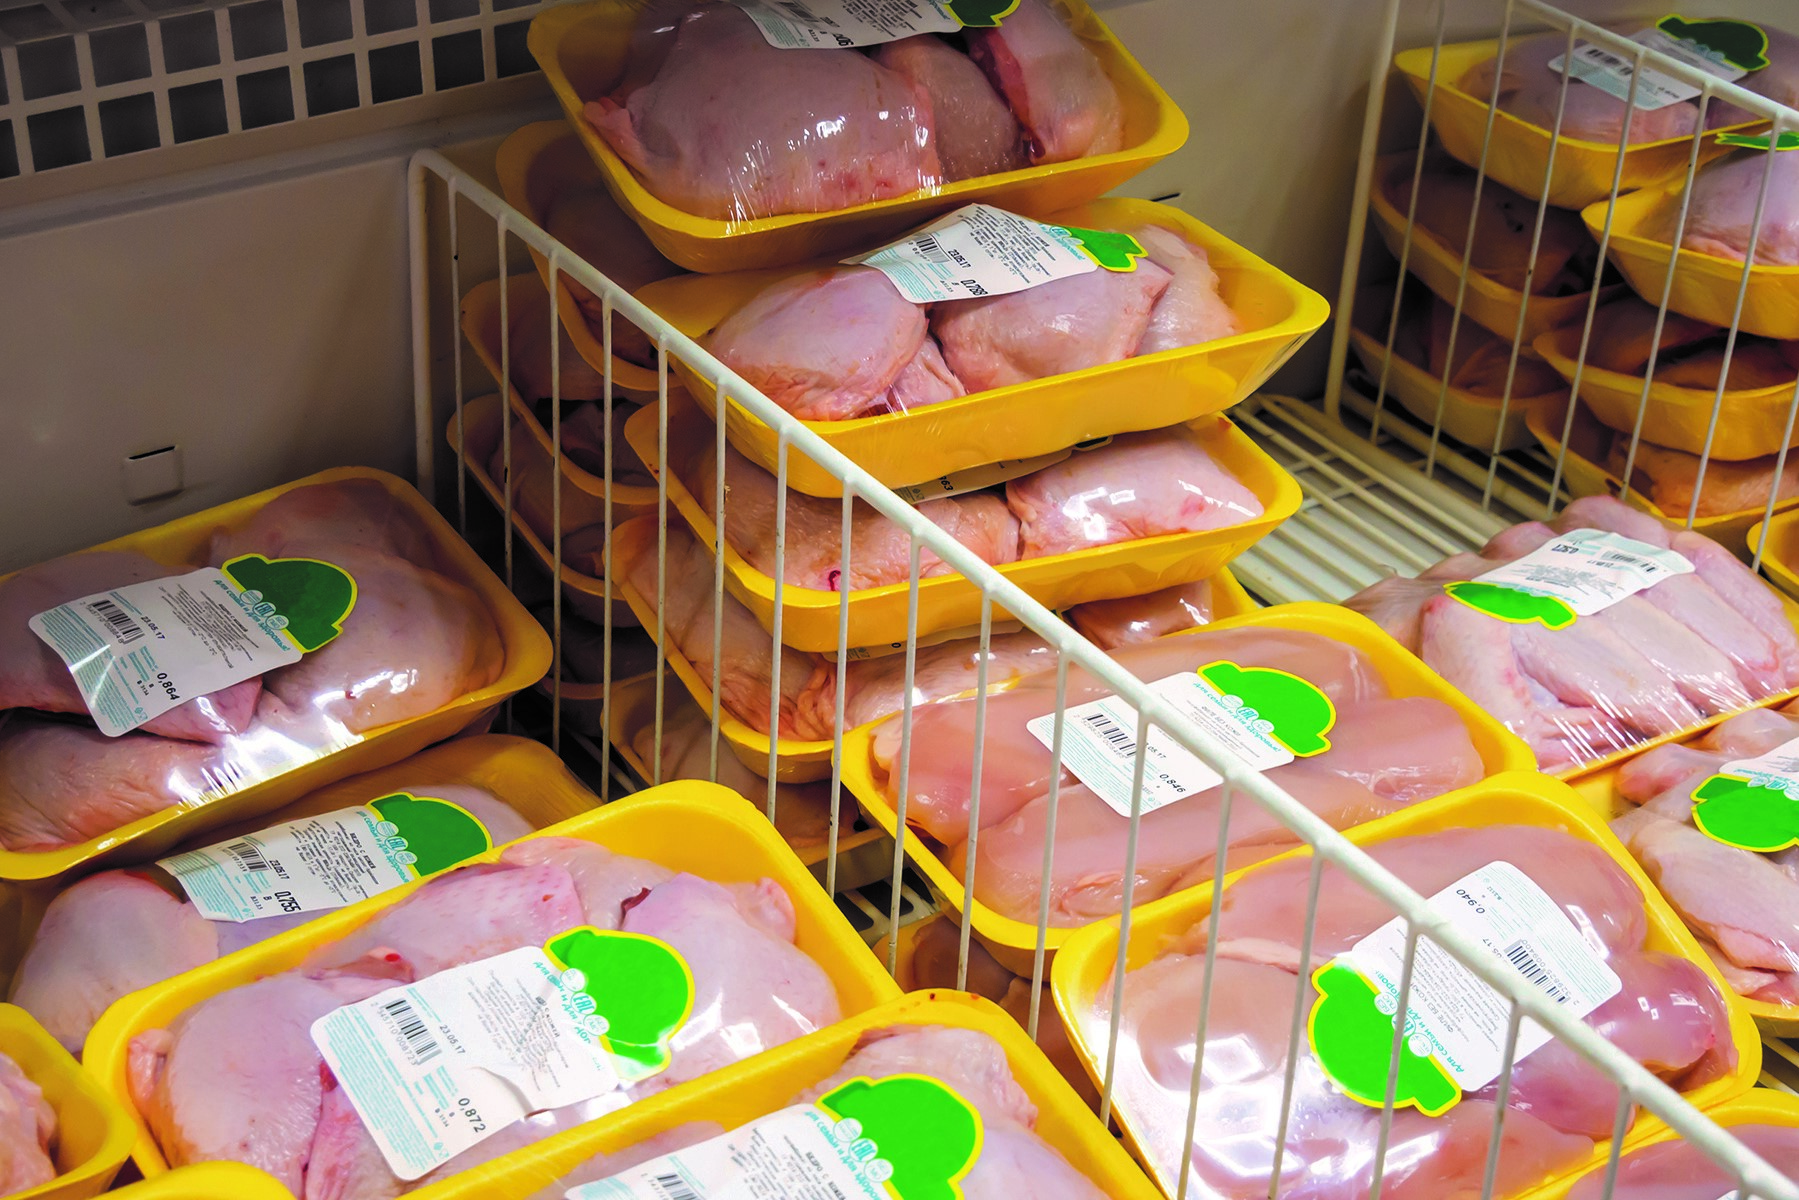 General Requirements for Sale of Chilled Poultry